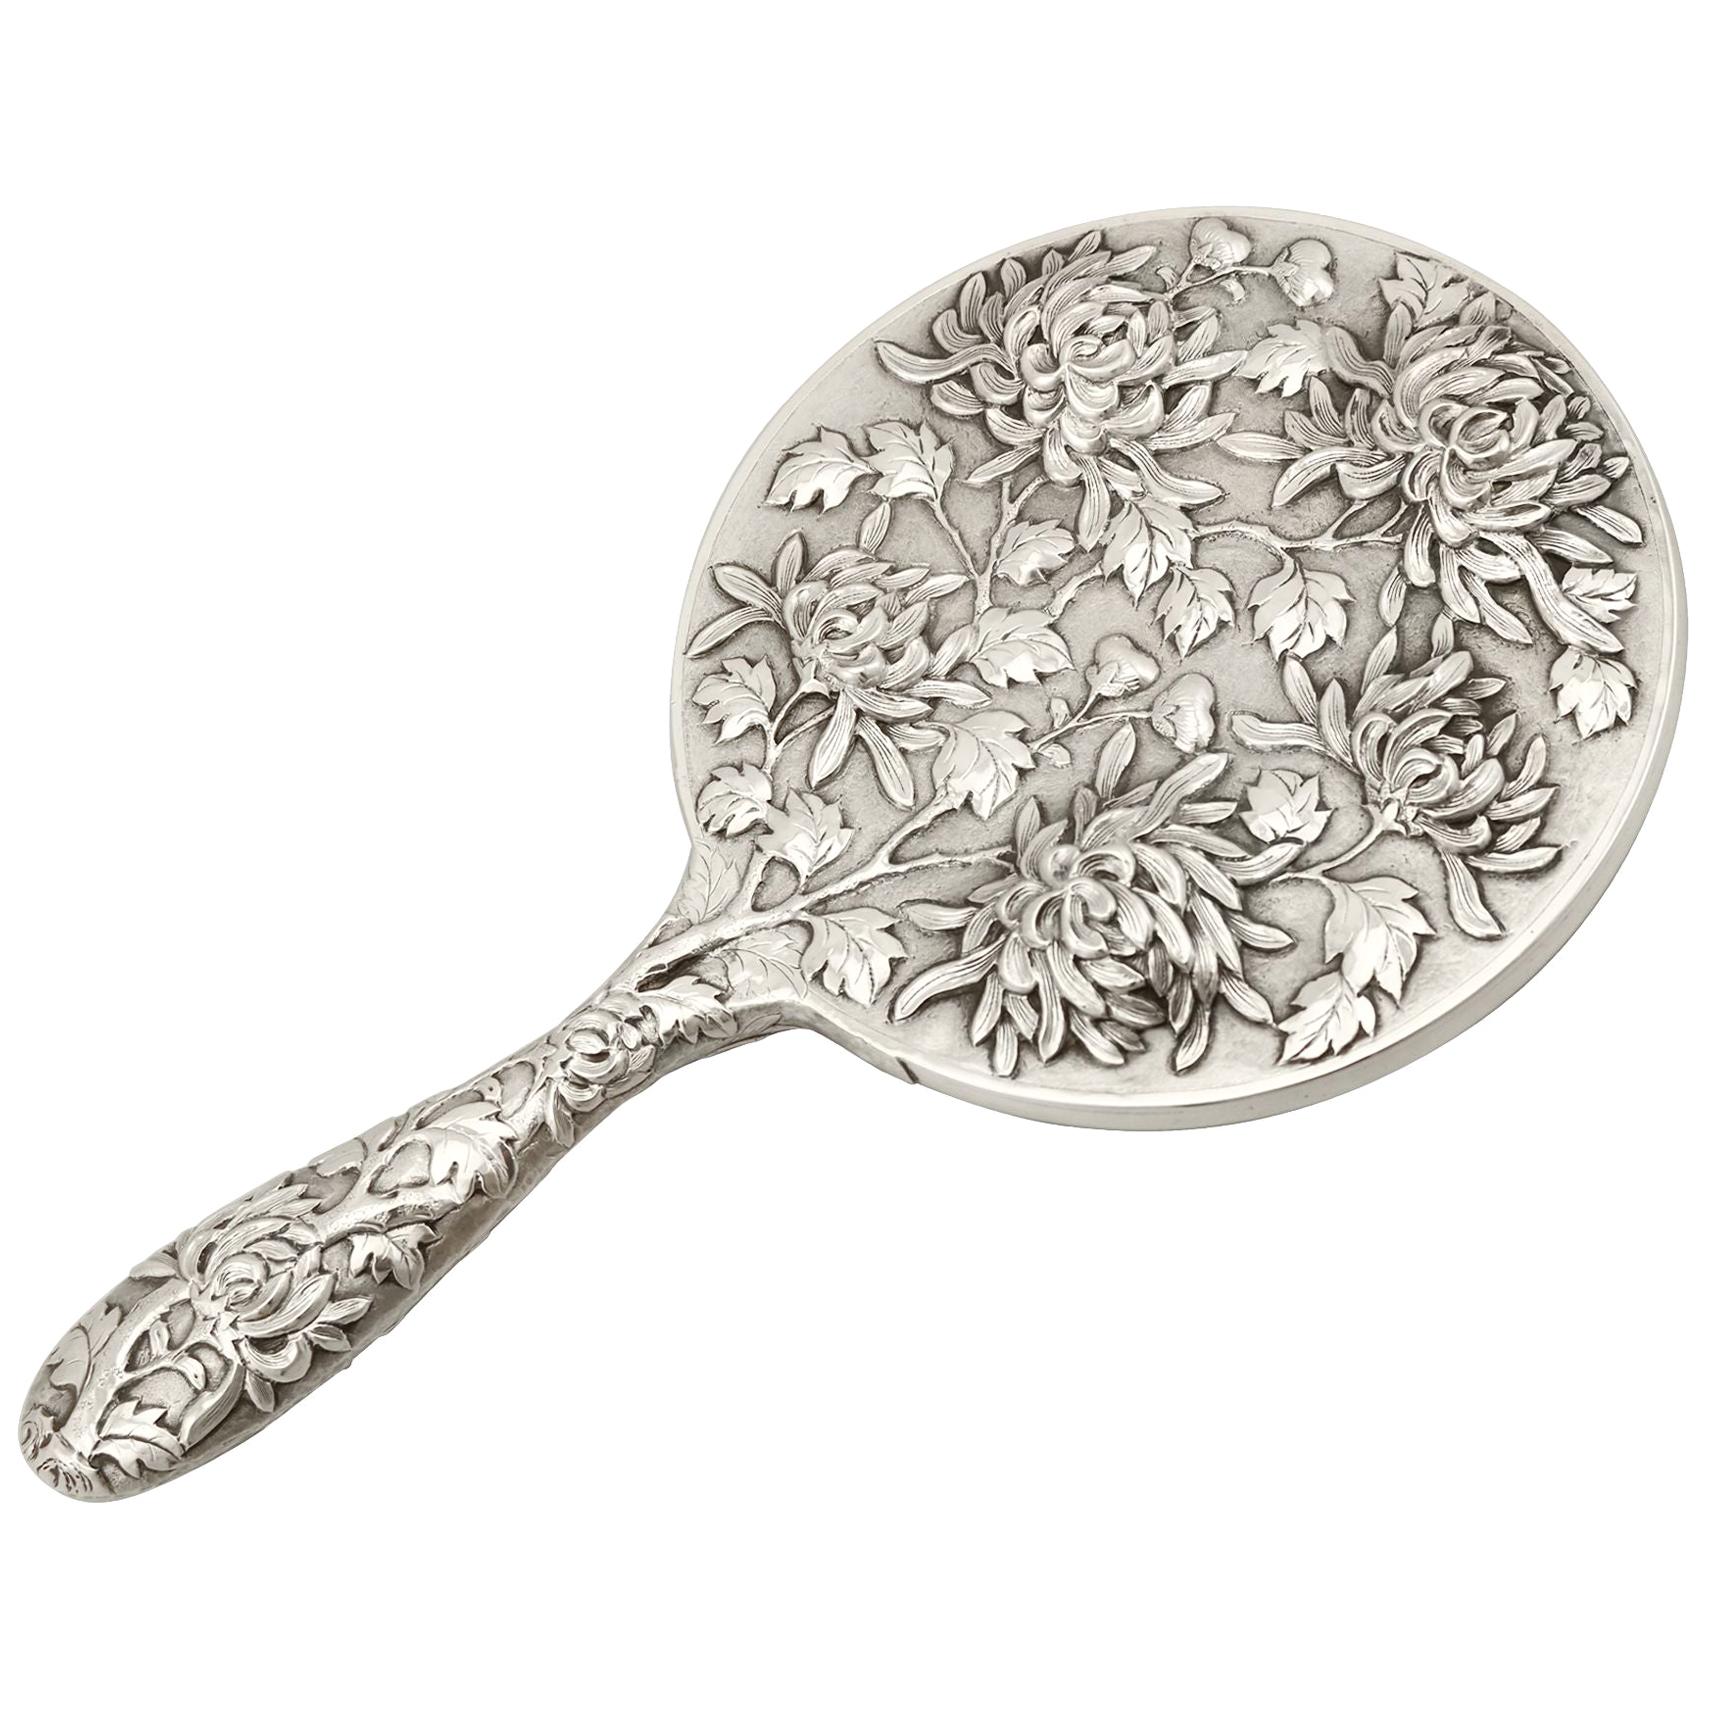 Chinese Export Silver Hand Mirror, Antique, circa 1900